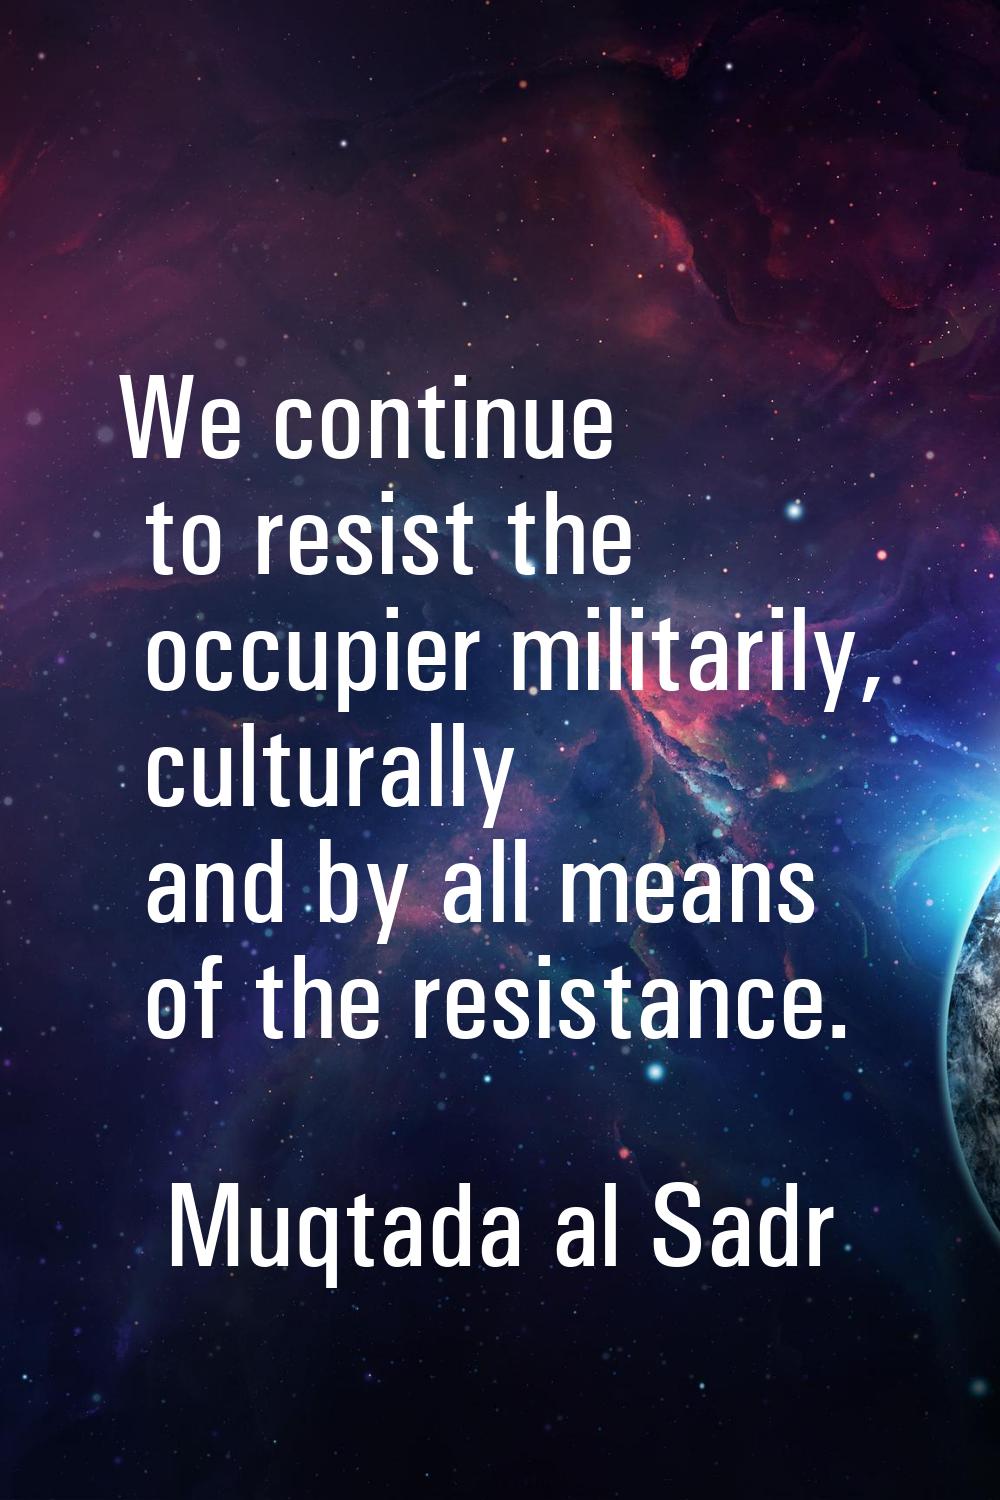 We continue to resist the occupier militarily, culturally and by all means of the resistance.